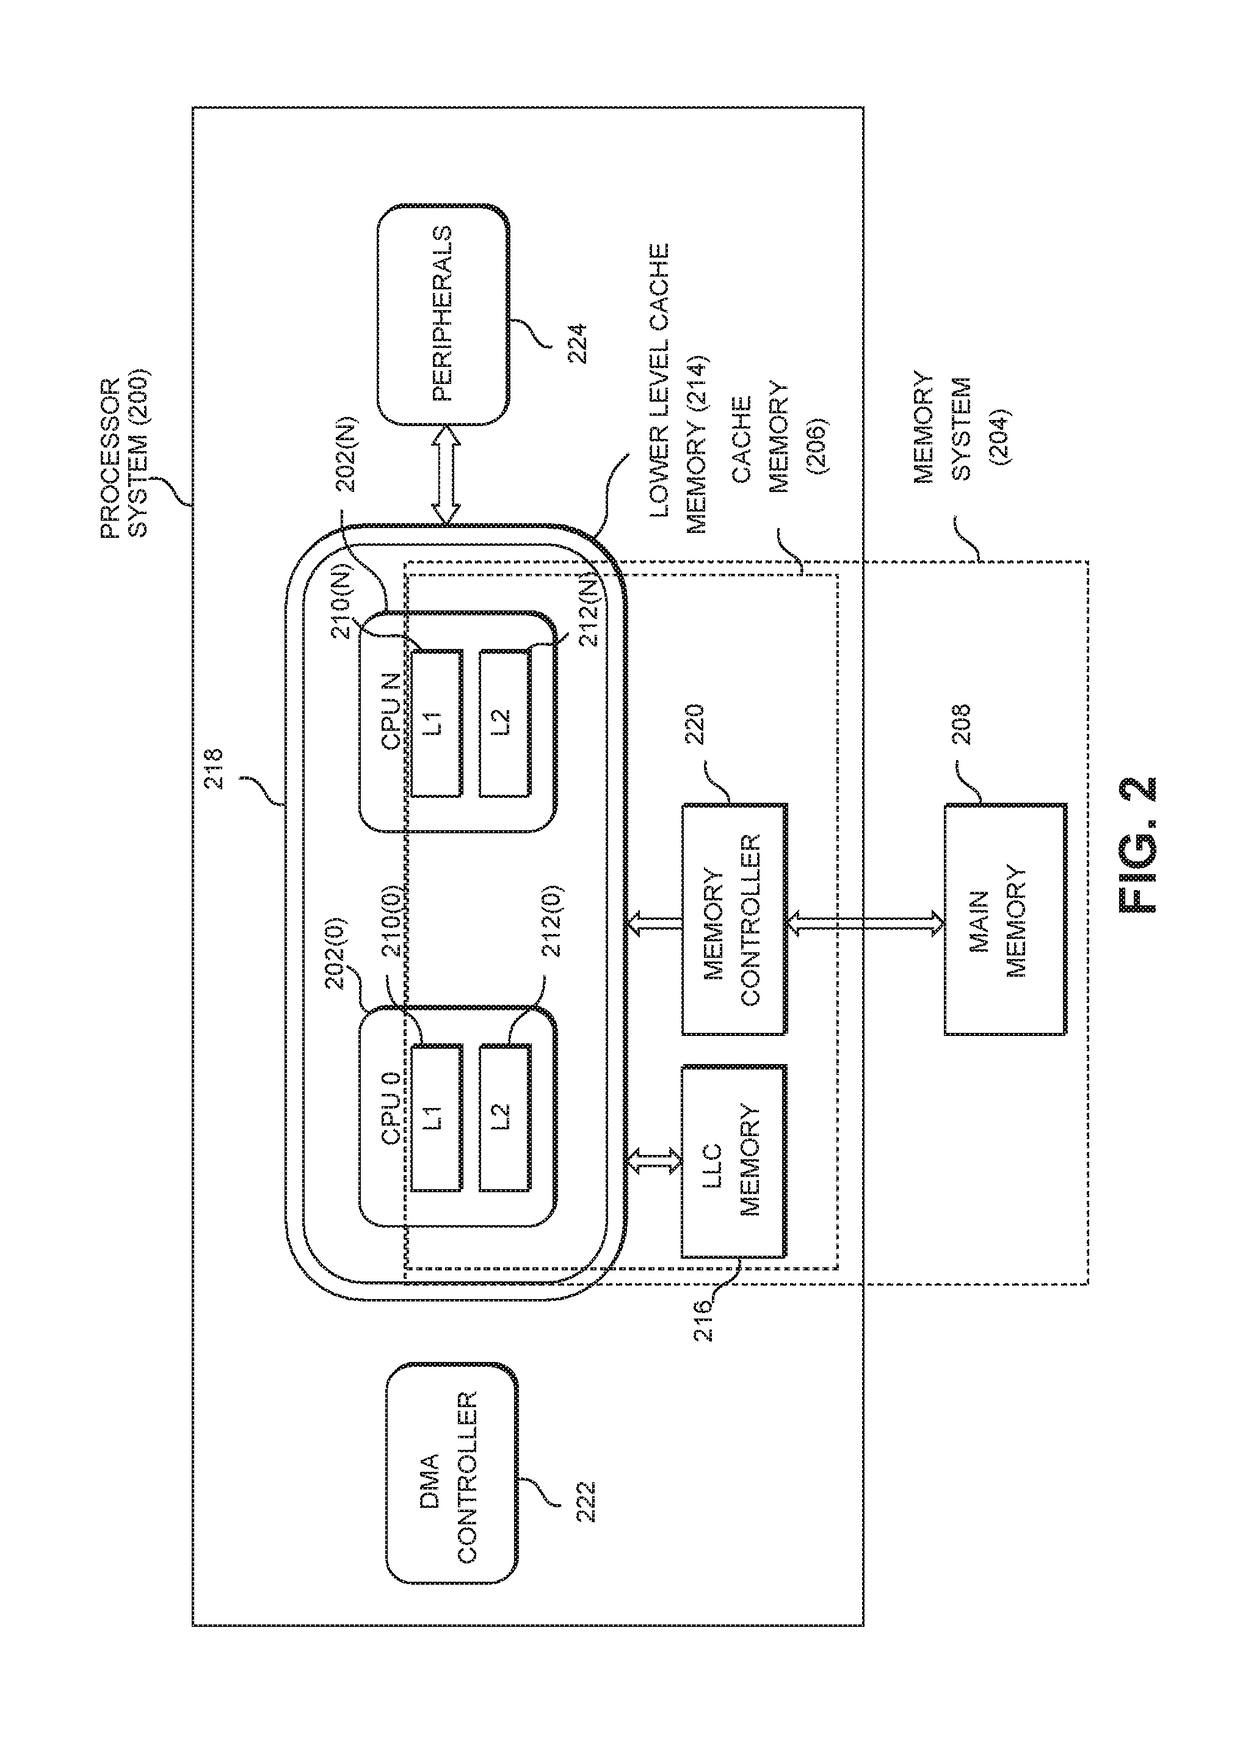 Data bit inversion tracking in cache memory to reduce data bits written for write operations